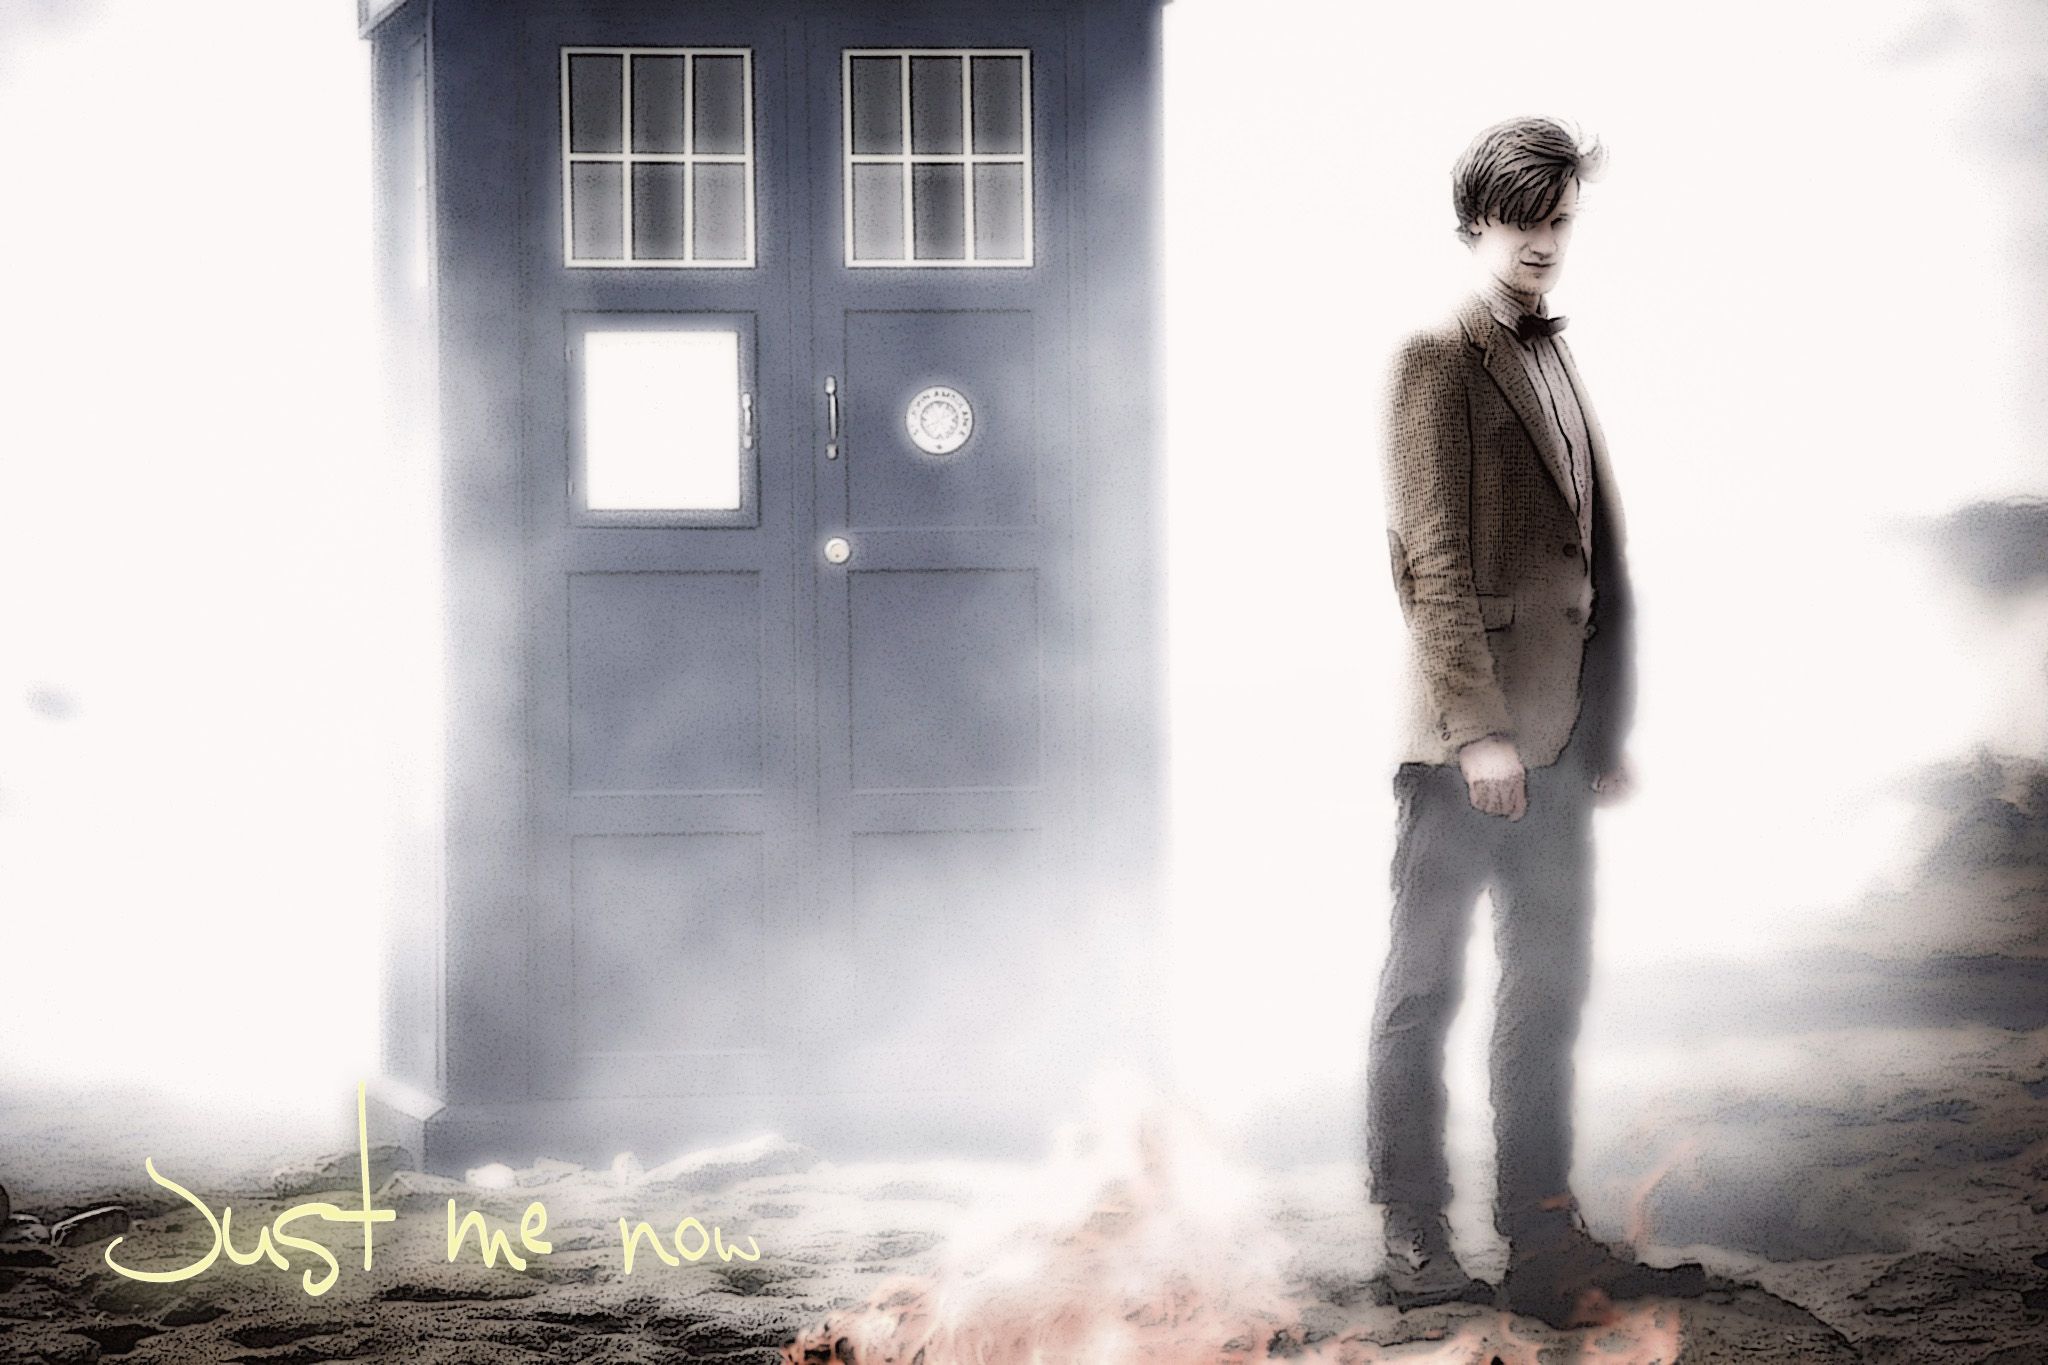 Doctor Who Wallpaper | 2048x1365 | ID:5209